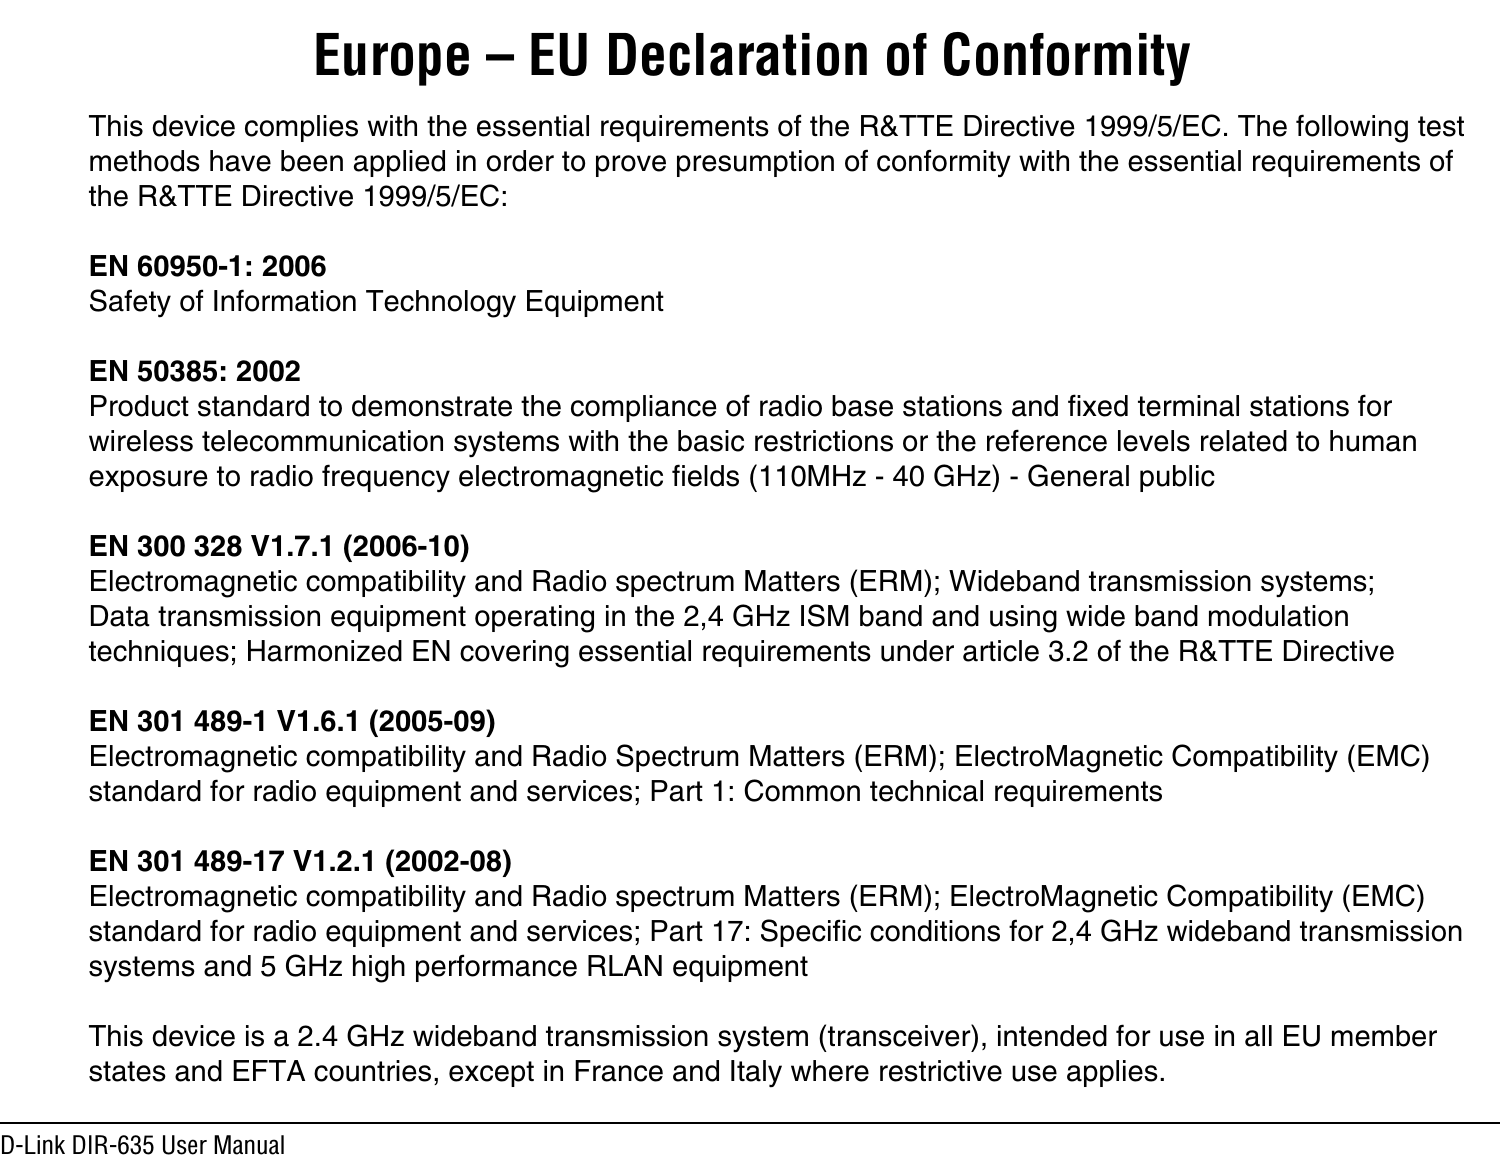 D-Link DIR-635 User ManualThis device complies with the essential requirements of the R&amp;TTE Directive 1999/5/EC. The following test methods have been applied in order to prove presumption of conformity with the essential requirements of the R&amp;TTE Directive 1999/5/EC:EN 60950-1: 2006Safety of Information Technology EquipmentEN 50385: 2002Product standard to demonstrate the compliance of radio base stations and fixed terminal stations for wireless telecommunication systems with the basic restrictions or the reference levels related to human exposure to radio frequency electromagnetic fields (110MHz - 40 GHz) - General publicEN 300 328 V1.7.1 (2006-10)Electromagnetic compatibility and Radio spectrum Matters (ERM); Wideband transmission systems; Data transmission equipment operating in the 2,4 GHz ISM band and using wide band modulation techniques; Harmonized EN covering essential requirements under article 3.2 of the R&amp;TTE DirectiveEN 301 489-1 V1.6.1 (2005-09)Electromagnetic compatibility and Radio Spectrum Matters (ERM); ElectroMagnetic Compatibility (EMC) standard for radio equipment and services; Part 1: Common technical requirementsEN 301 489-17 V1.2.1 (2002-08) Electromagnetic compatibility and Radio spectrum Matters (ERM); ElectroMagnetic Compatibility (EMC) standard for radio equipment and services; Part 17: Specific conditions for 2,4 GHz wideband transmissionsystems and 5 GHz high performance RLAN equipmentThis device is a 2.4 GHz wideband transmission system (transceiver), intended for use in all EU member states and EFTA countries, except in France and Italy where restrictive use applies.Europe – EU Declaration of Conformity